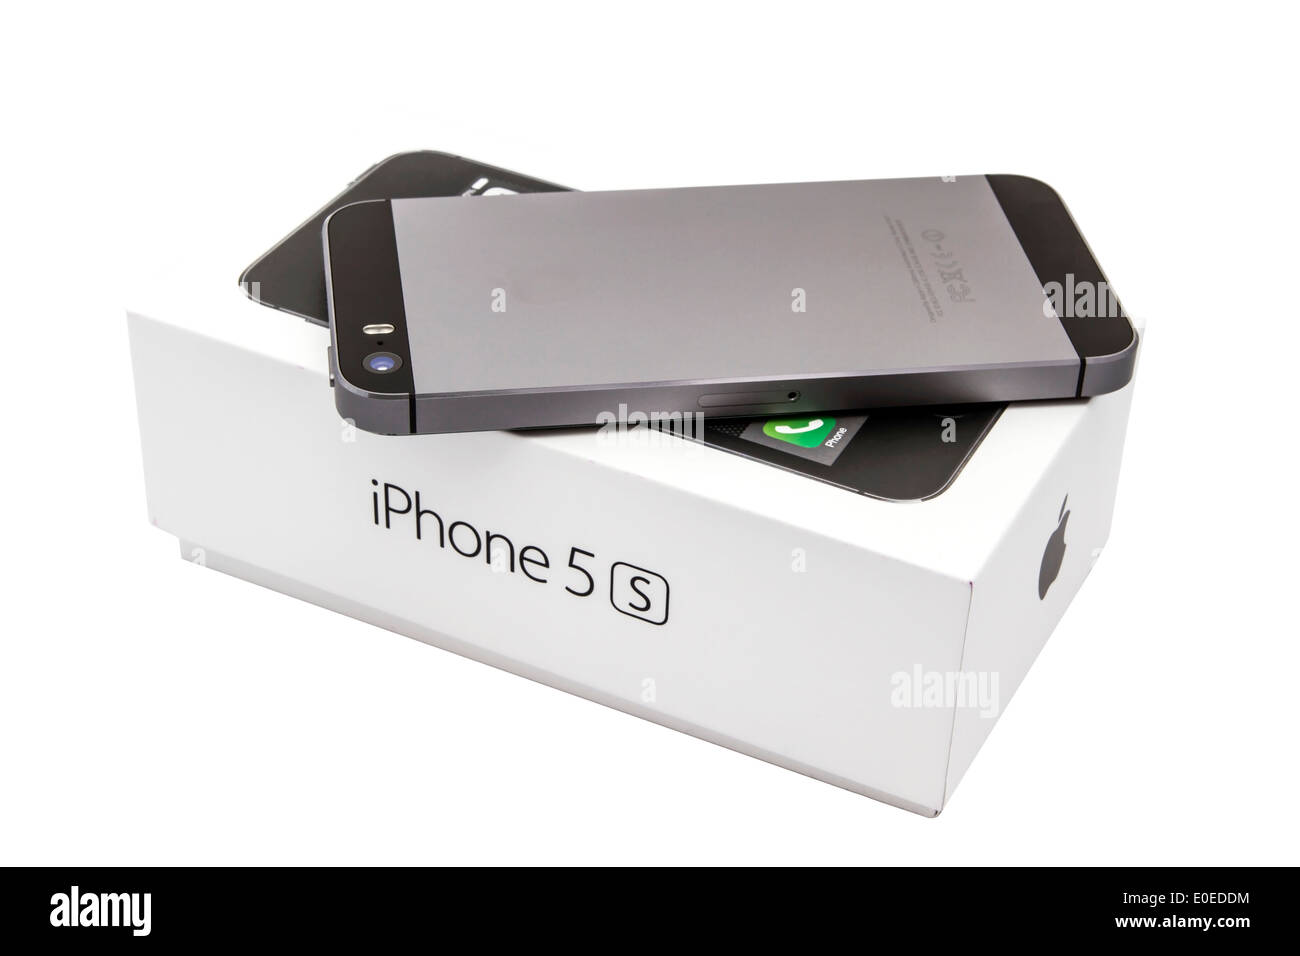 iPhone 5s and box isolated on white background Stock Photo